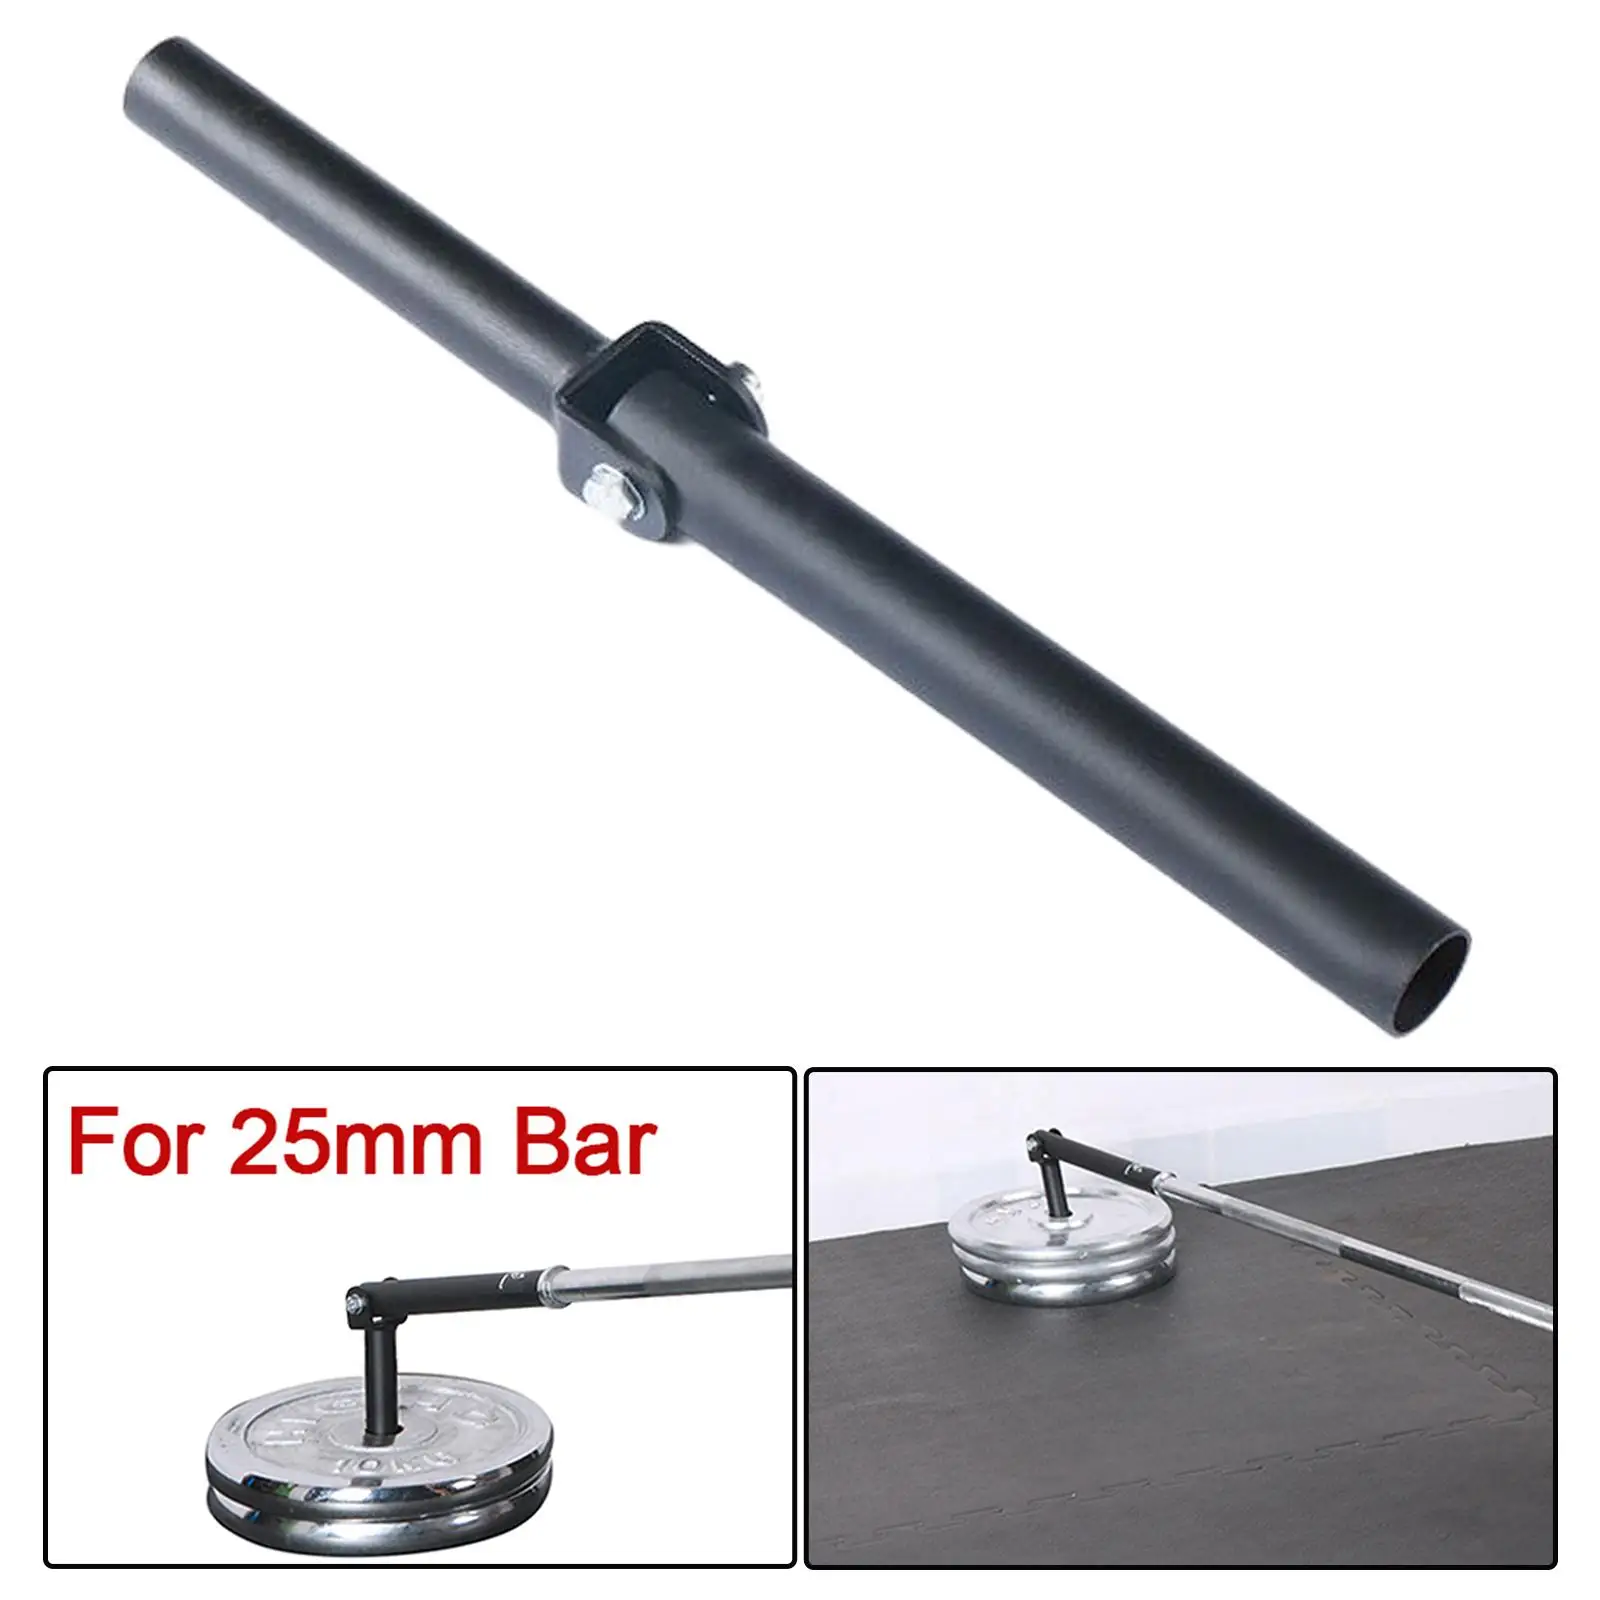 T Bar Row Plate Post Insert Landmine Barbell Attachment Easy to Install Weight Plate Holders Gym Equipment for Exercises Gym